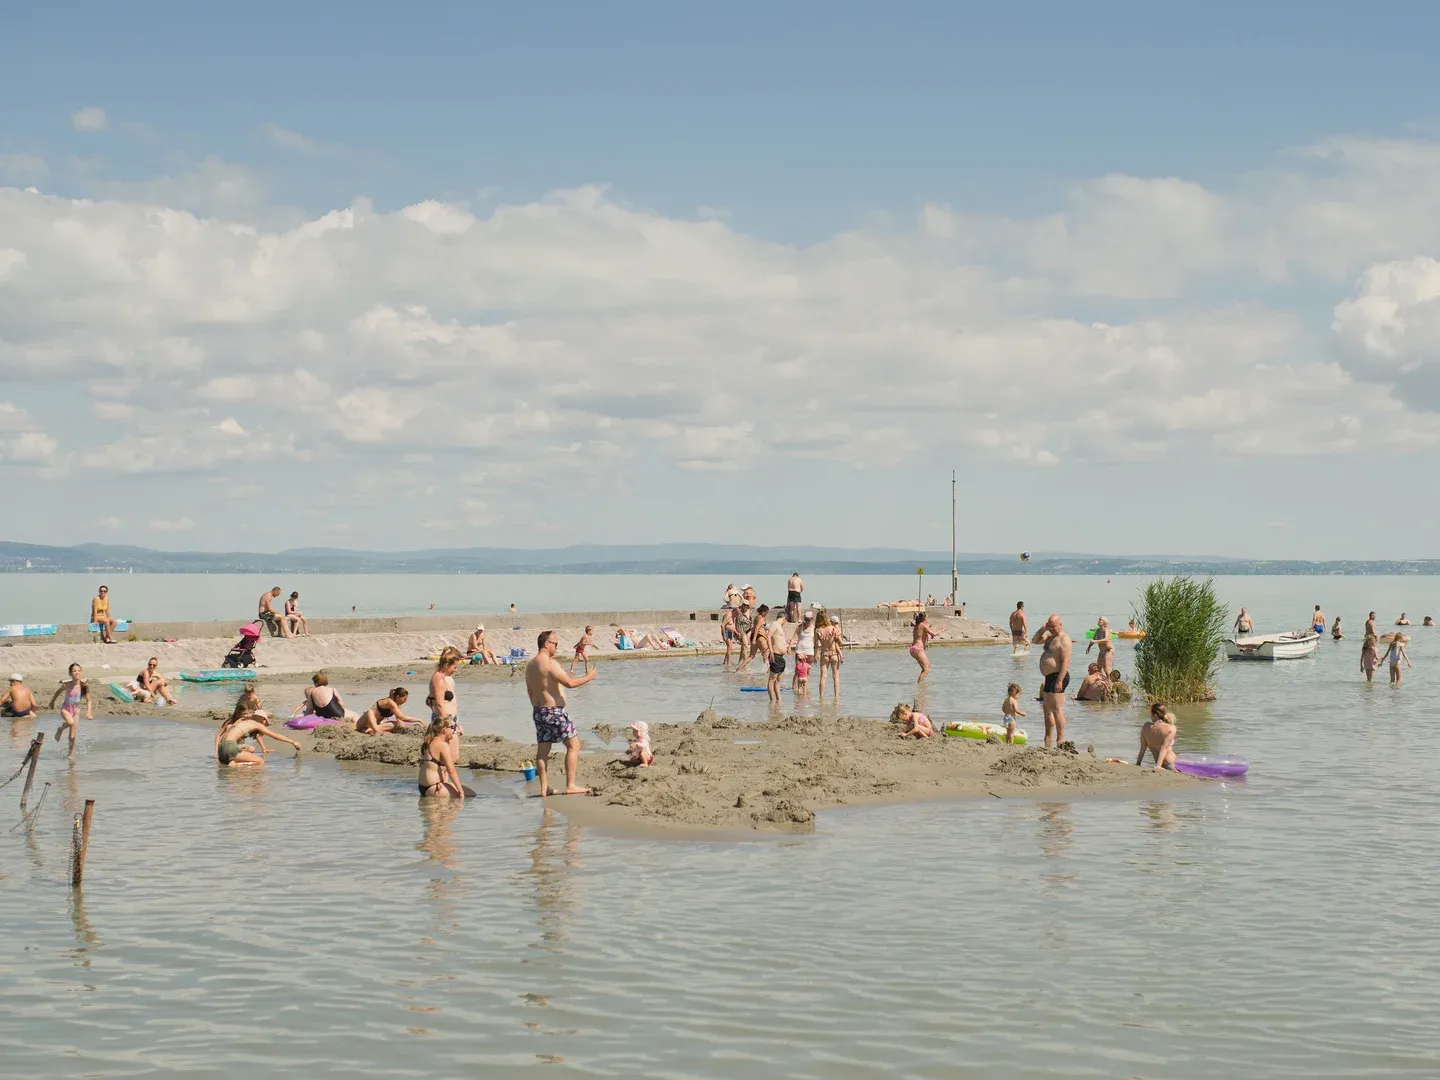 Swimmers in low-water Lake Balaton during the summer heatwave. Siófok, Lake Balaton, Somogy county. During heat waves, people from the cities cool off by the water's edge. But the water level of Lake Balaton (Hungary's largest natural lake, covering 592 km2) has been falling steadily. In May, the average water level of the lake was around 105 cm. By the end of August, it had dropped to 78 cm.